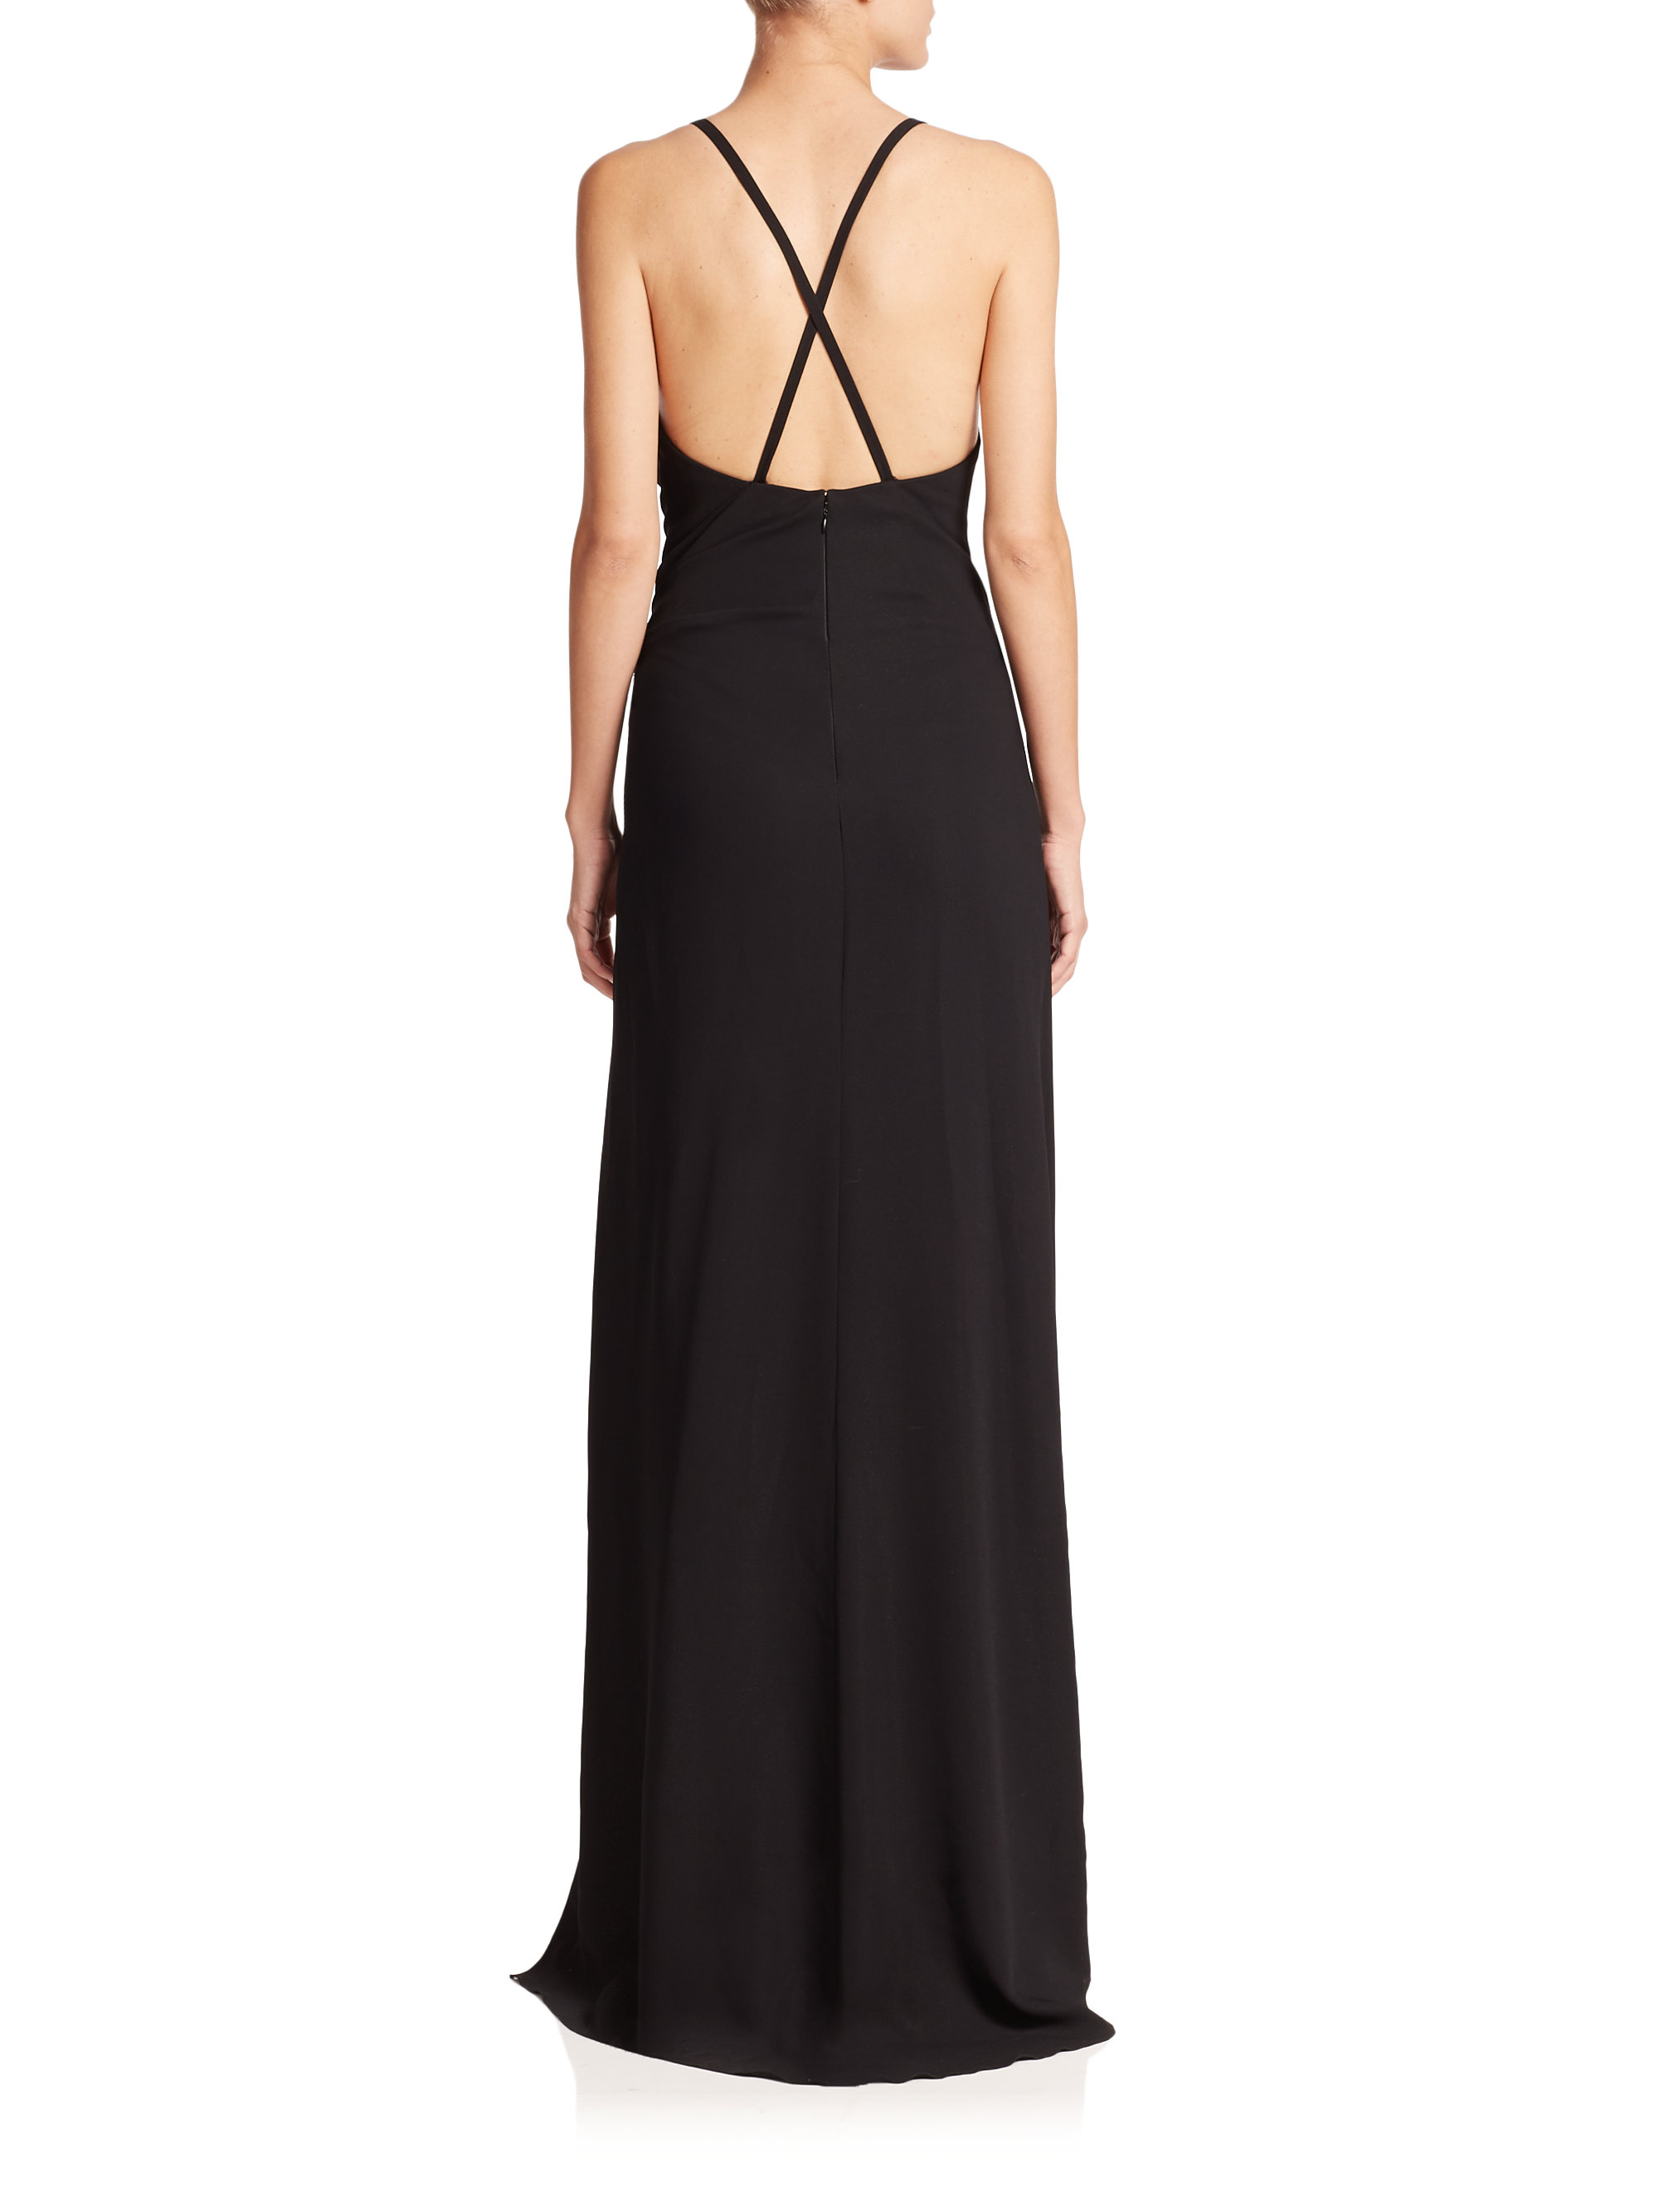 Lyst - Roberto Cavalli Pleated Deep V Snake Detail Gown in Black